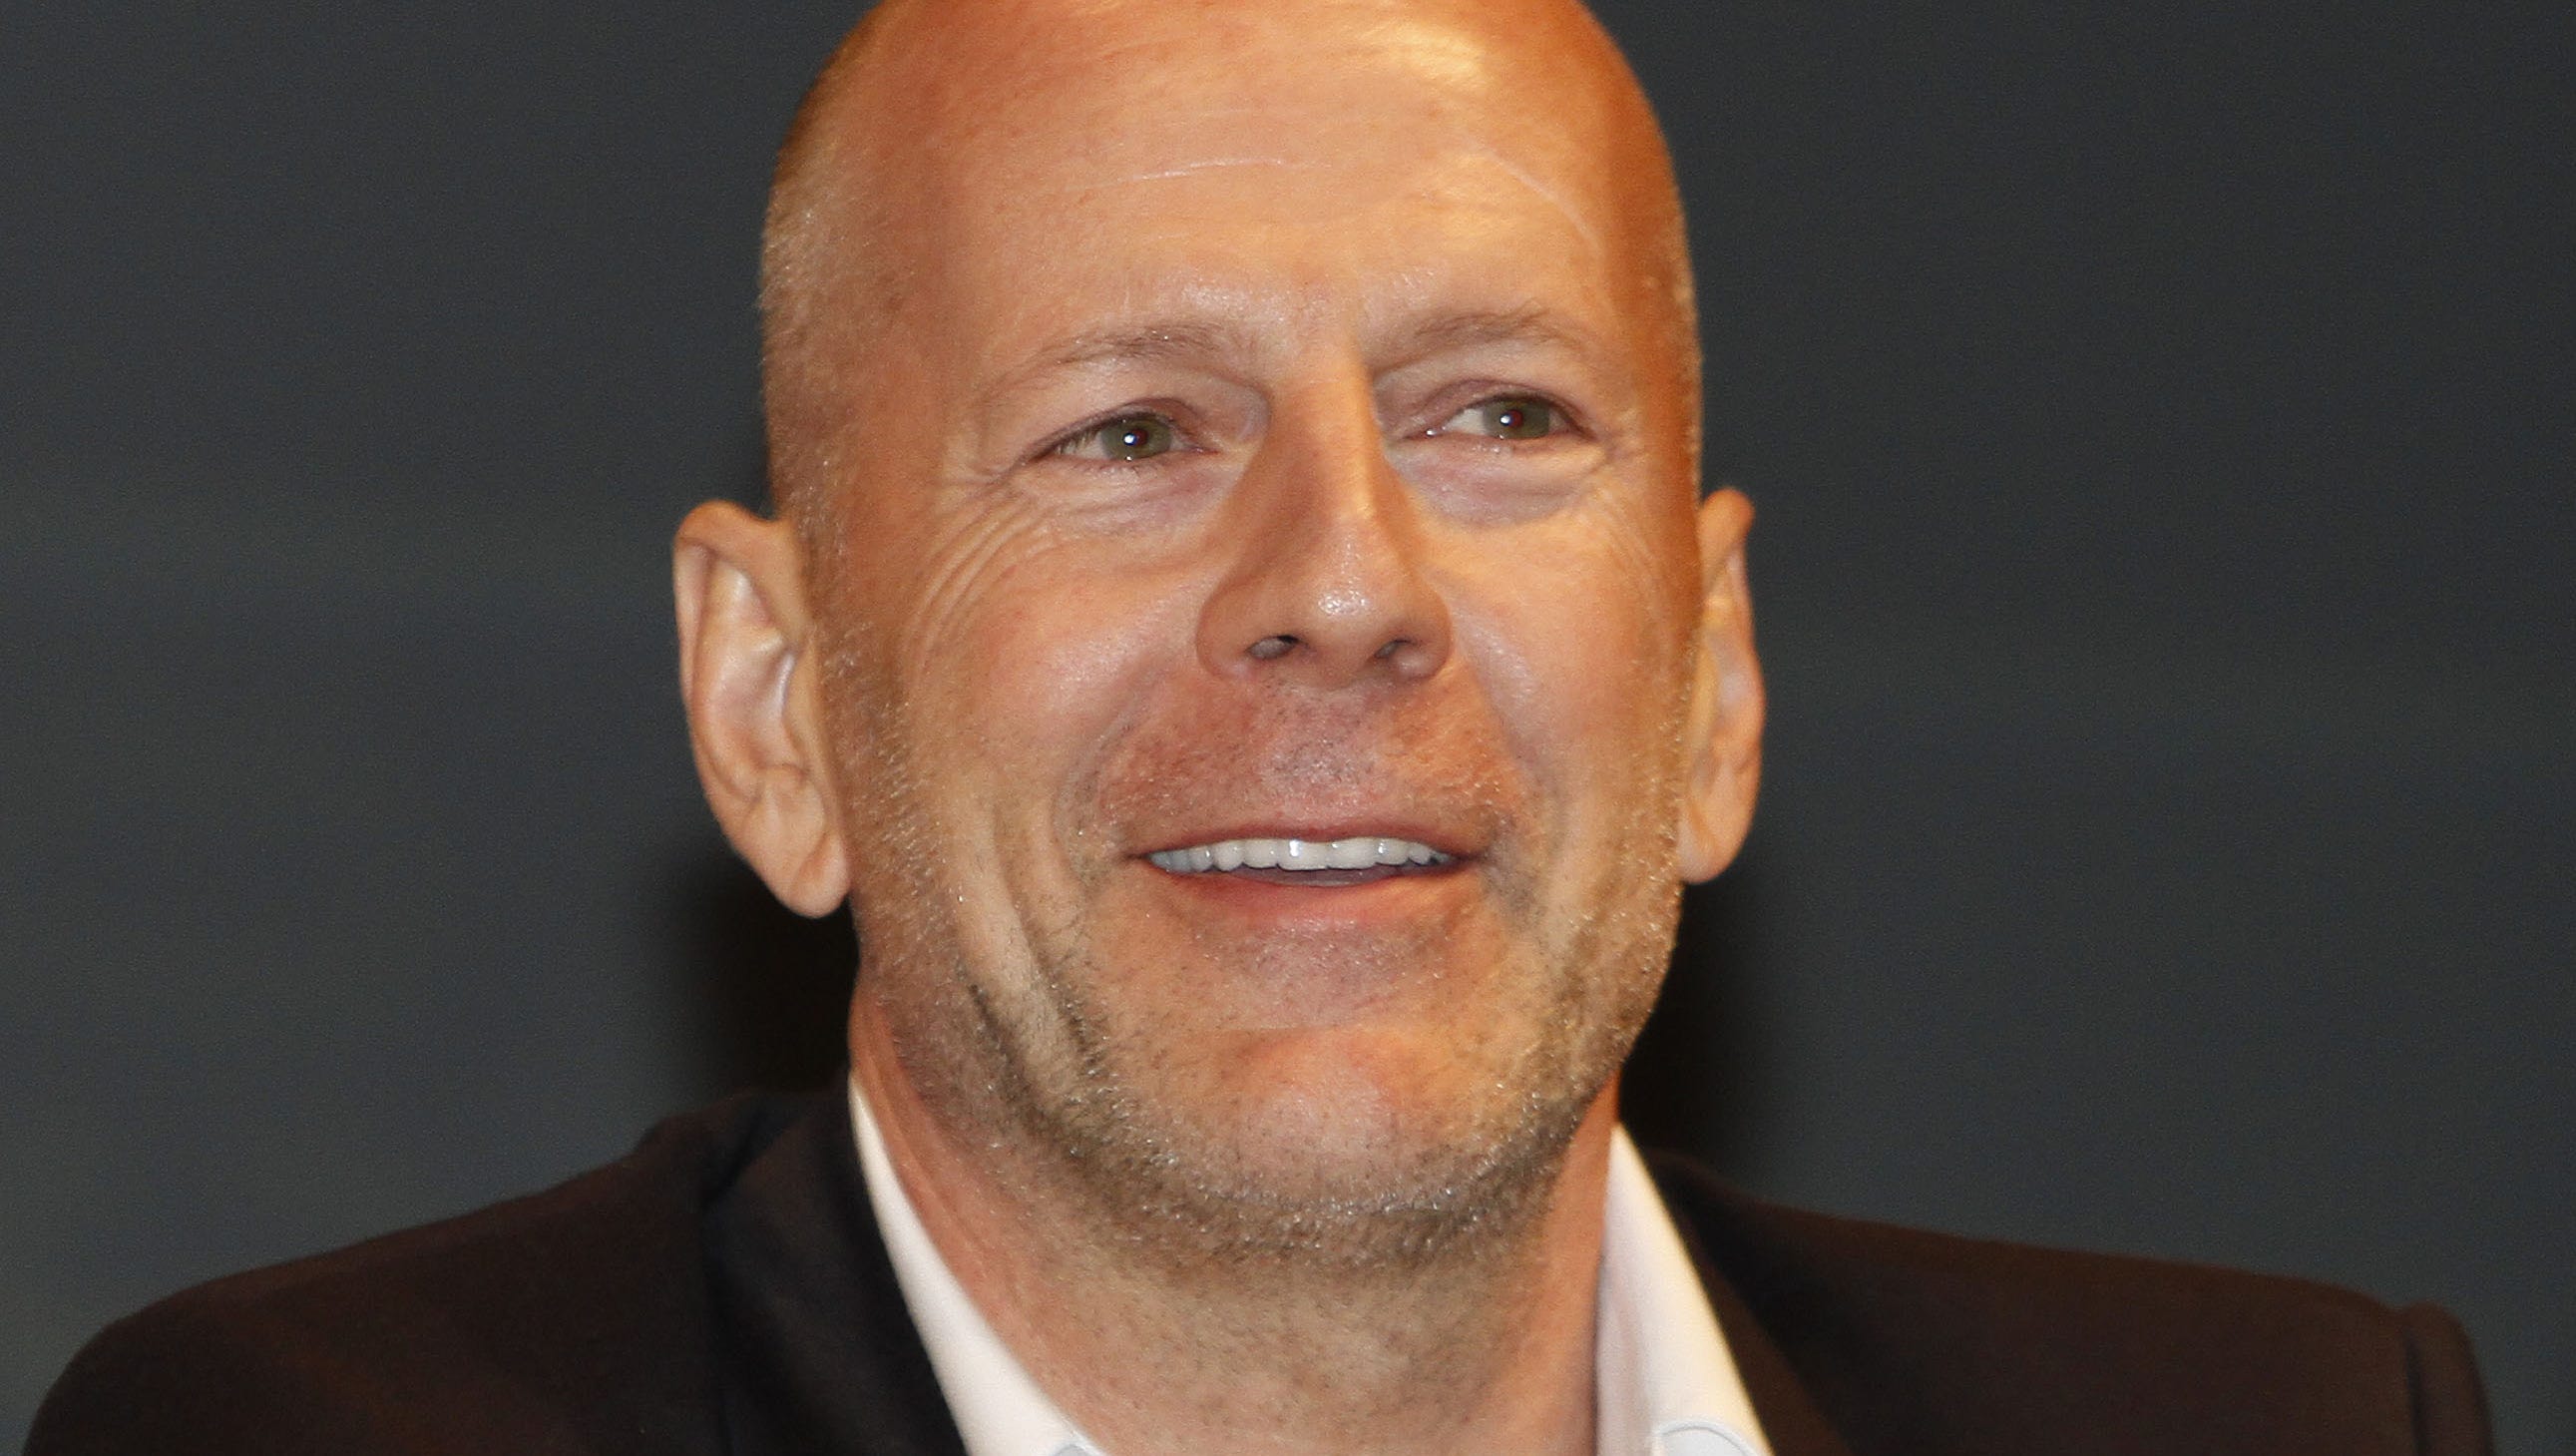 Bruce Willis Returns To Cincinnati To Film New Action Movie Bruce willis was not filming saturday, according to a member from the film's crew, but that did not deter the excitement of the people gathered to watch usmani said she is a bruce willis fan but will probably see the movie just because it was filmed in cincinnati. bruce willis returns to cincinnati to